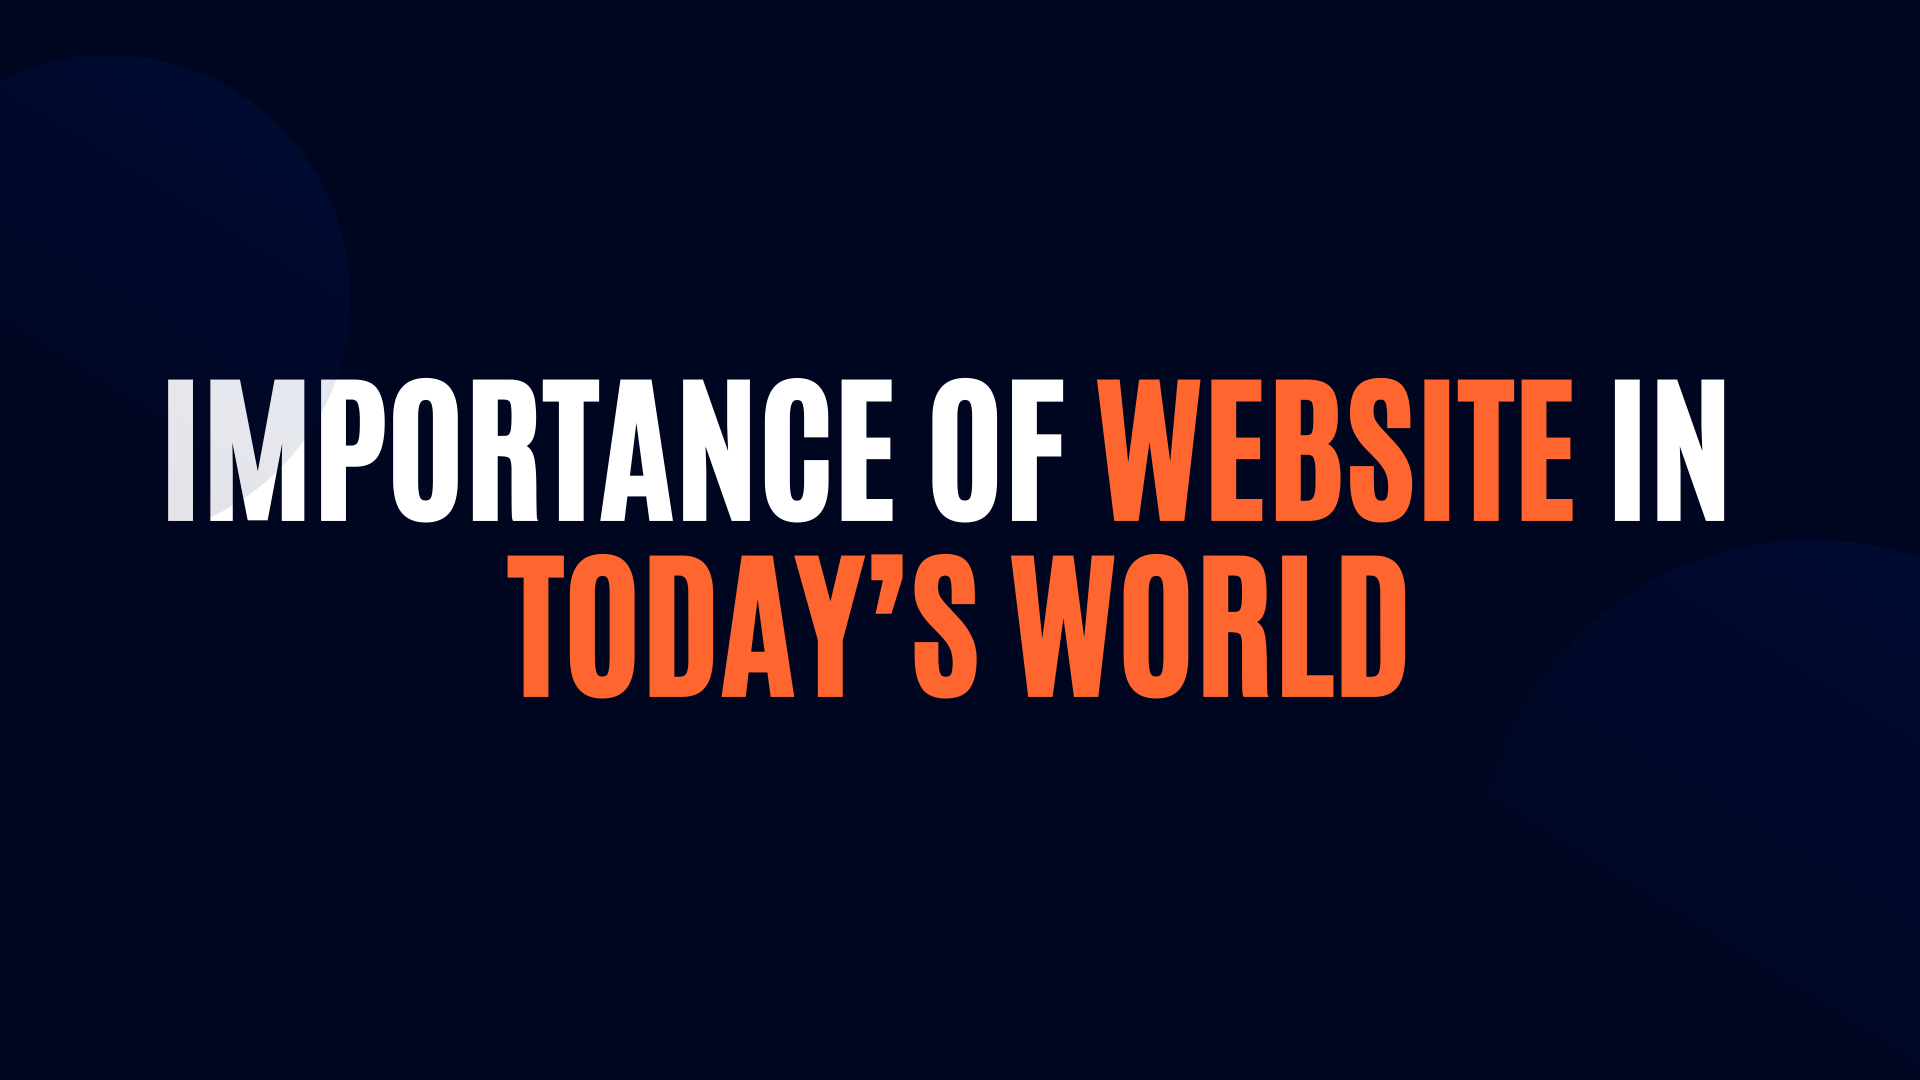 Importance of Website in today’s world